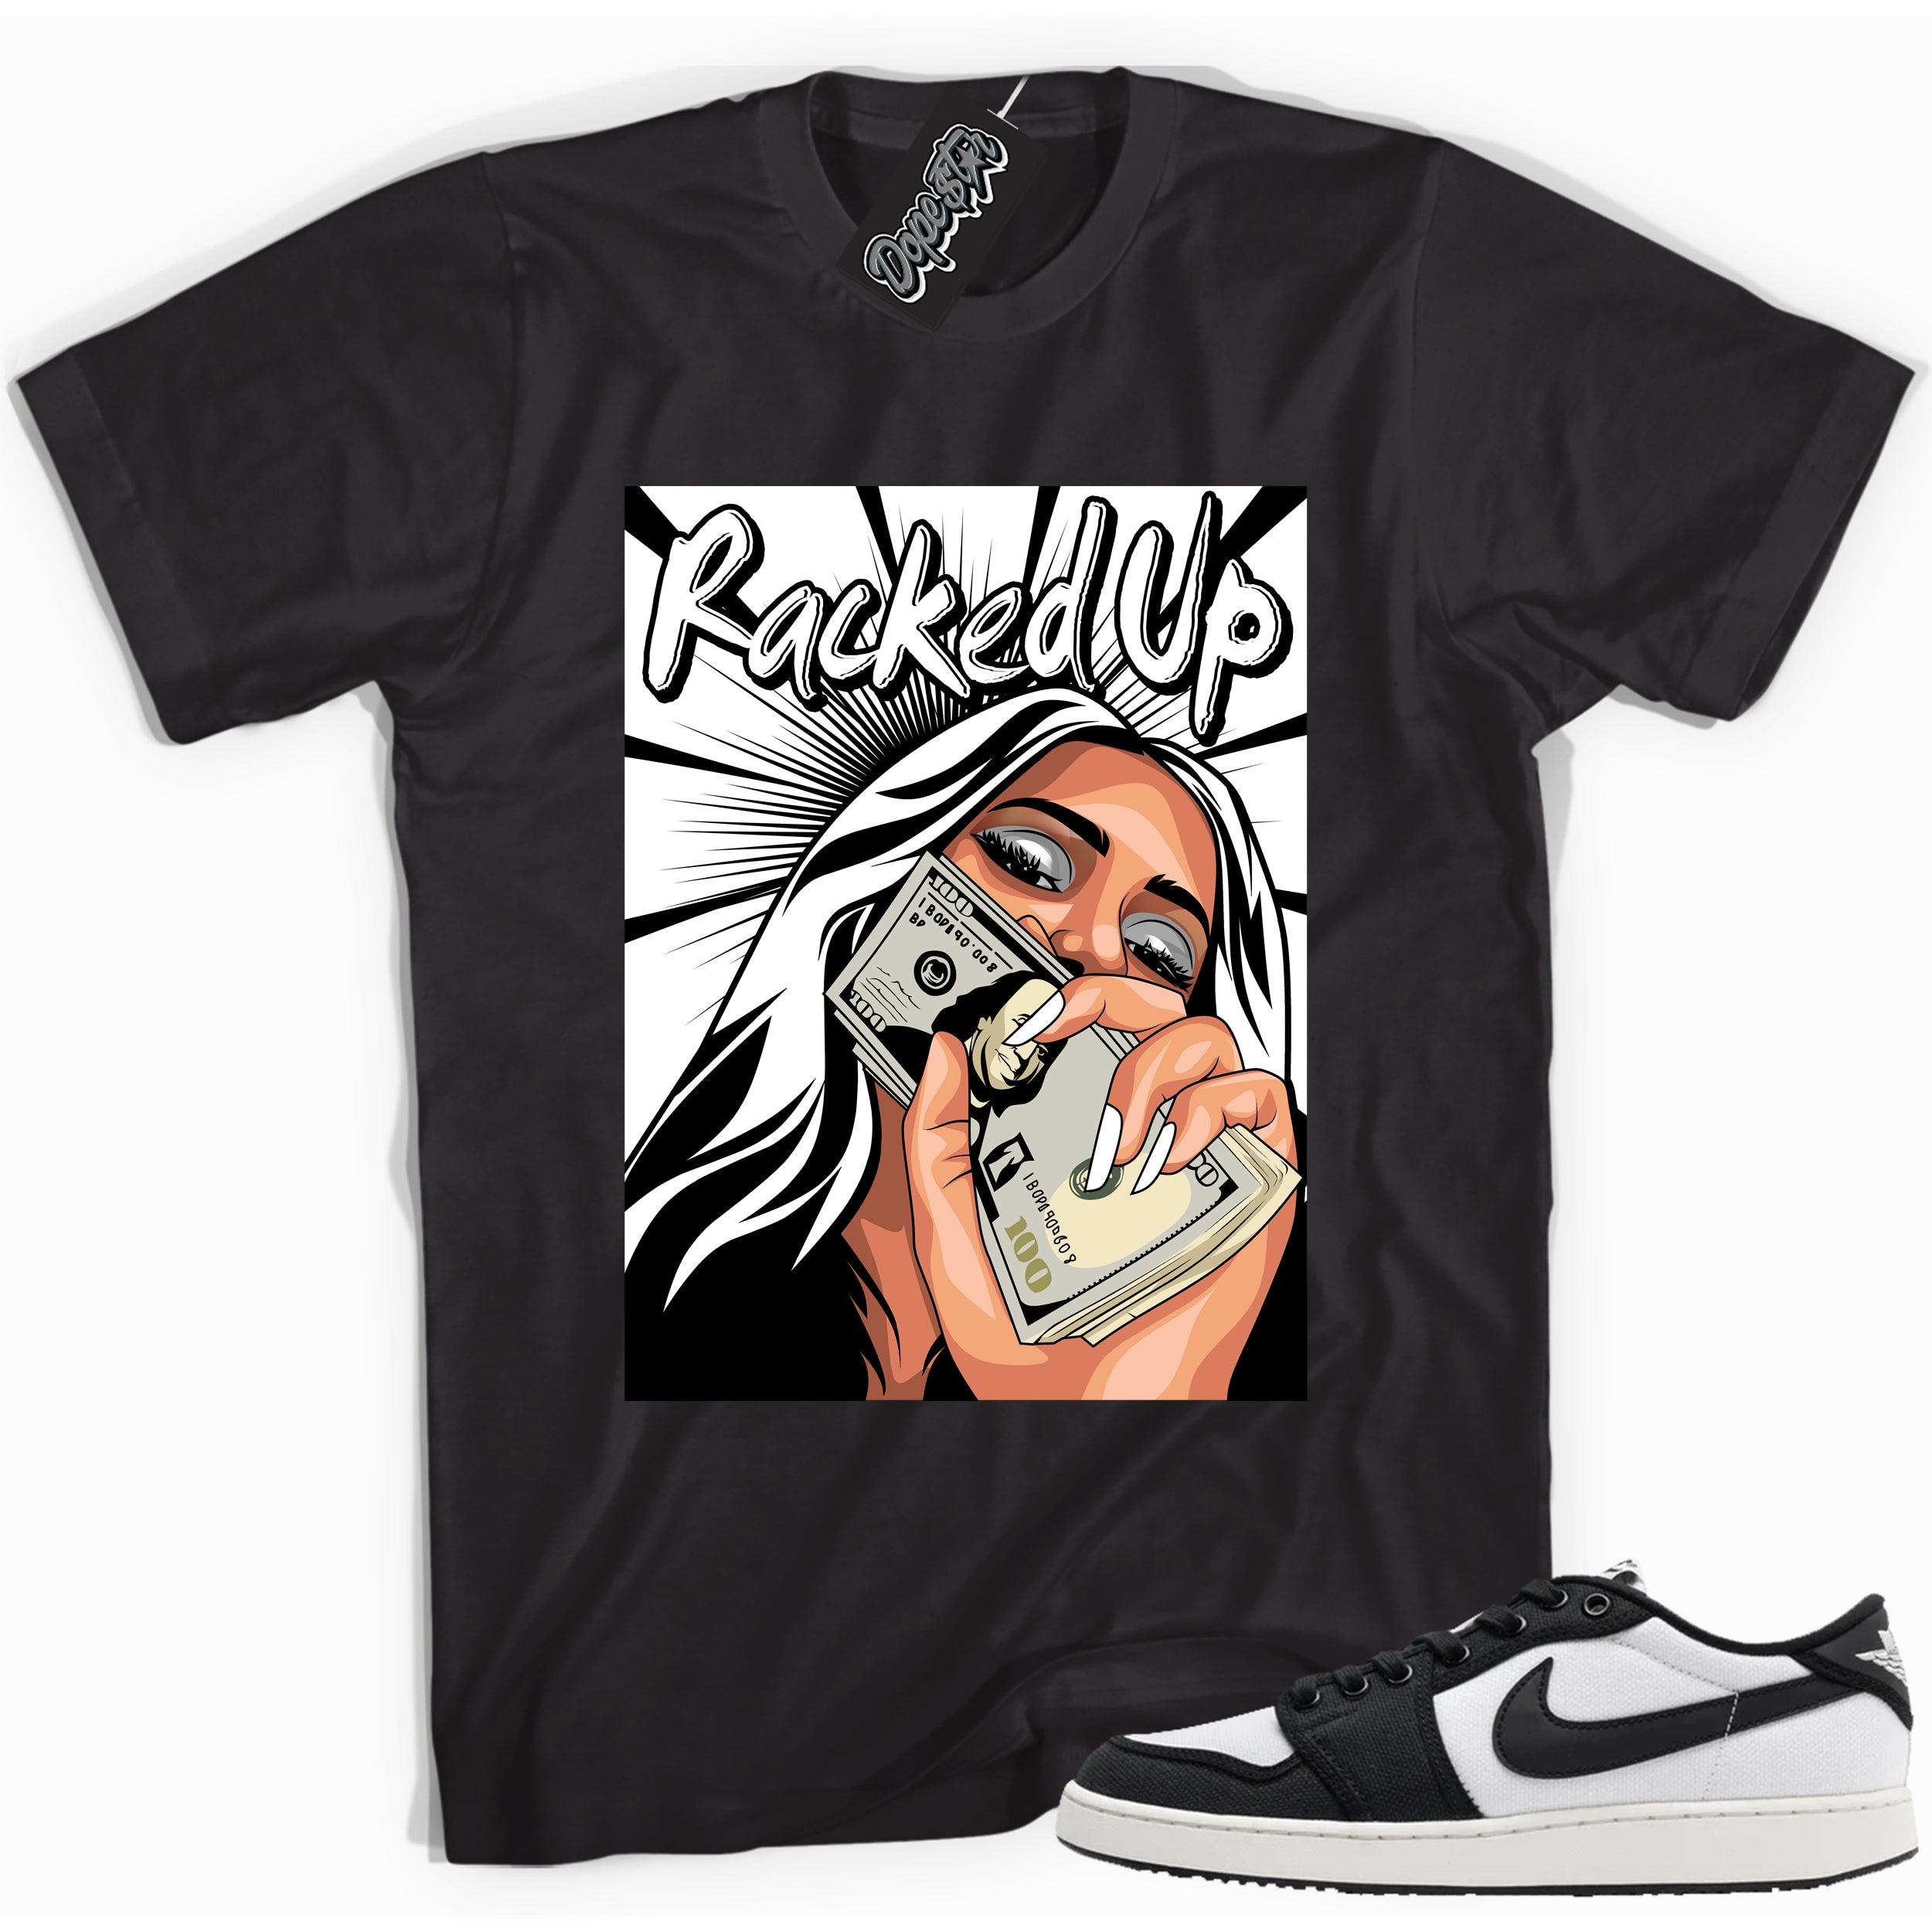 Cool black graphic tee with 'racked up' print, that perfectly matches Air Jordan 1 Retro Ajko Low Black & White sneakers.